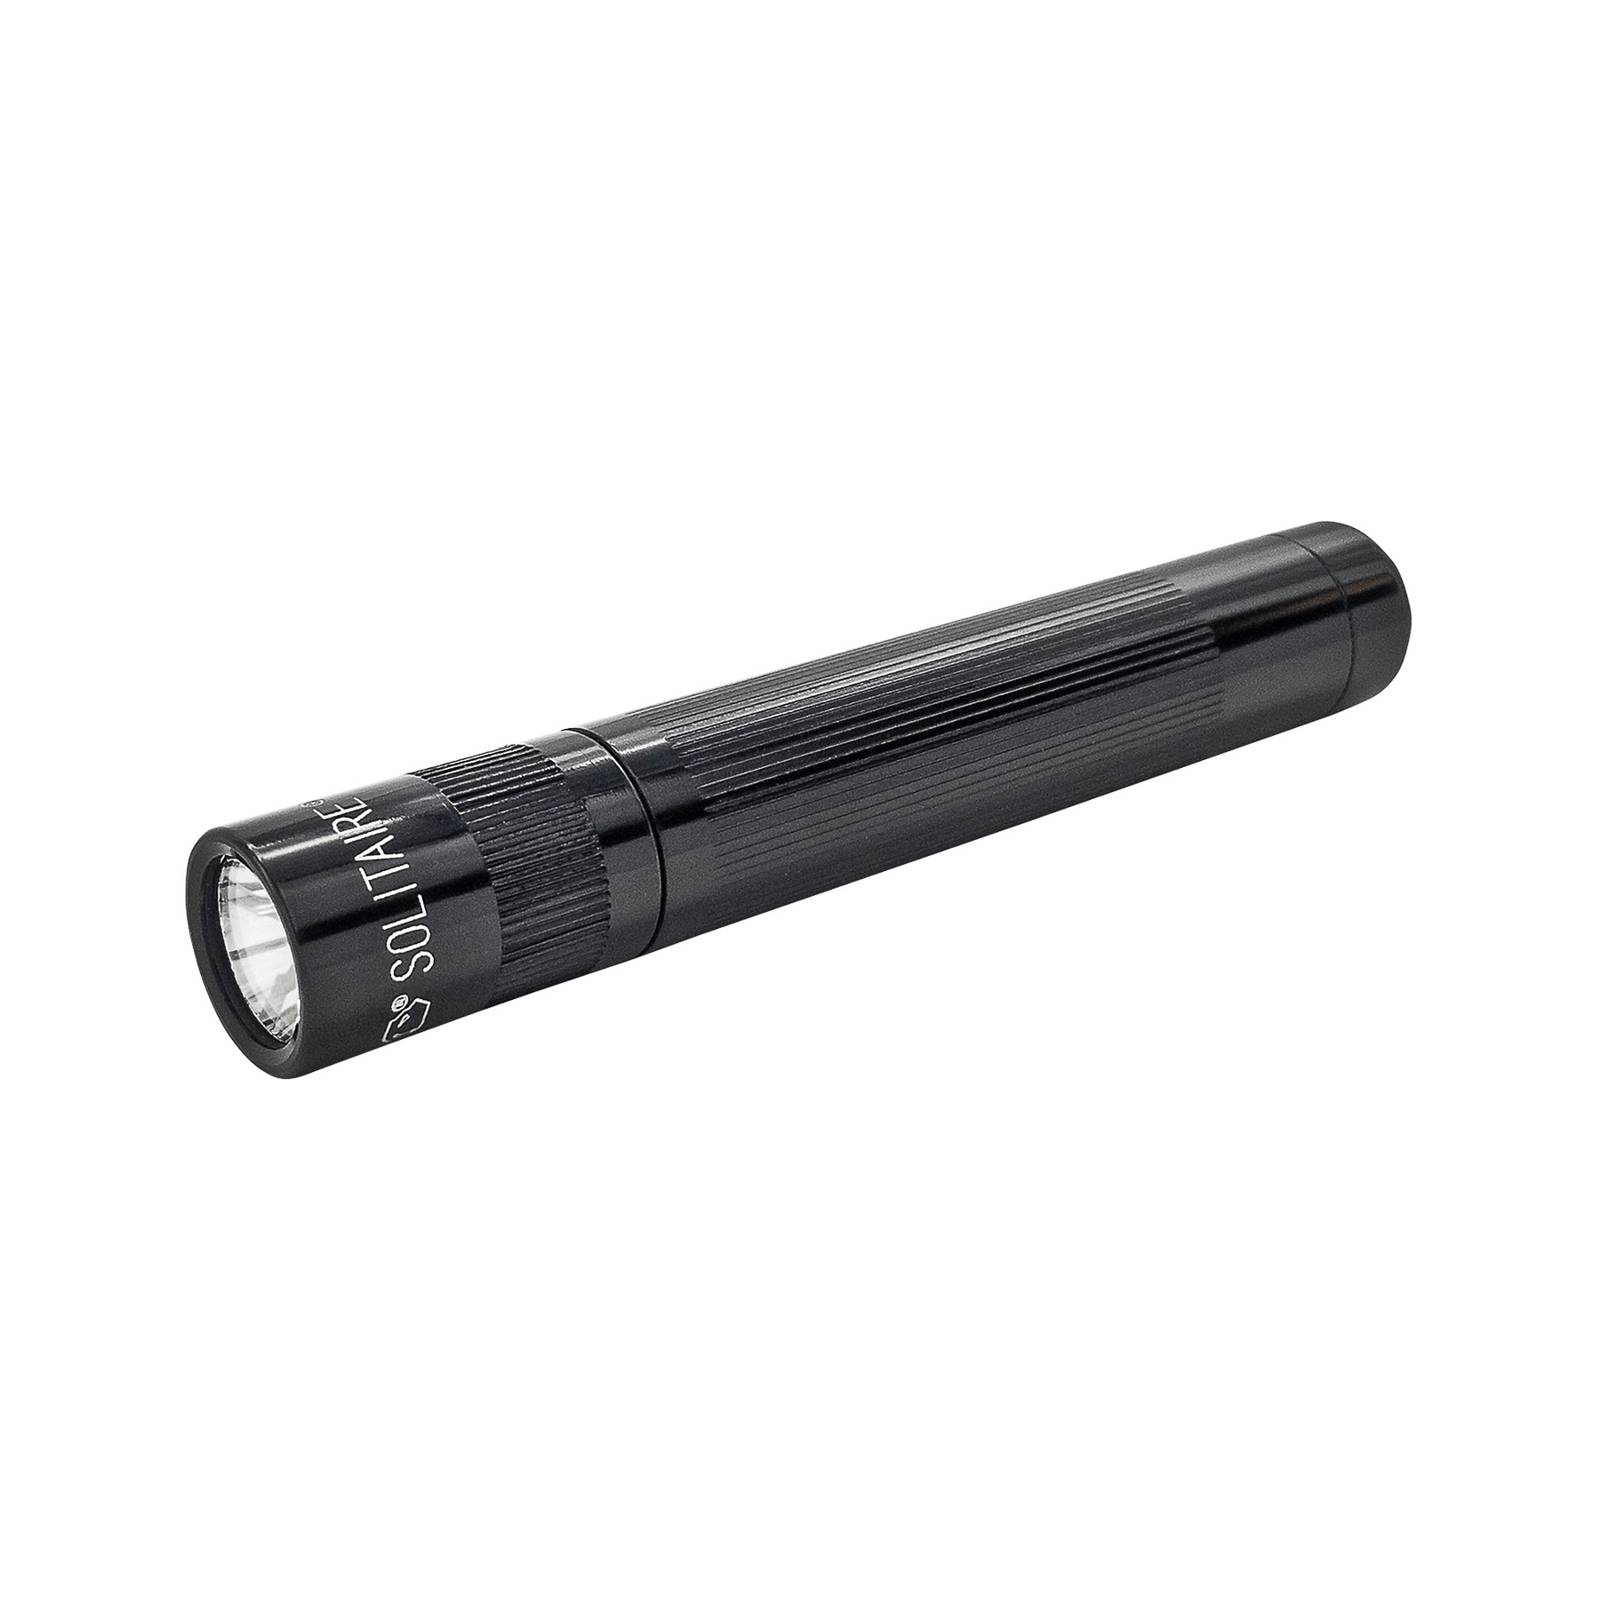 Maglite LED-lommelygte Solitaire 1-cellet AAA sort